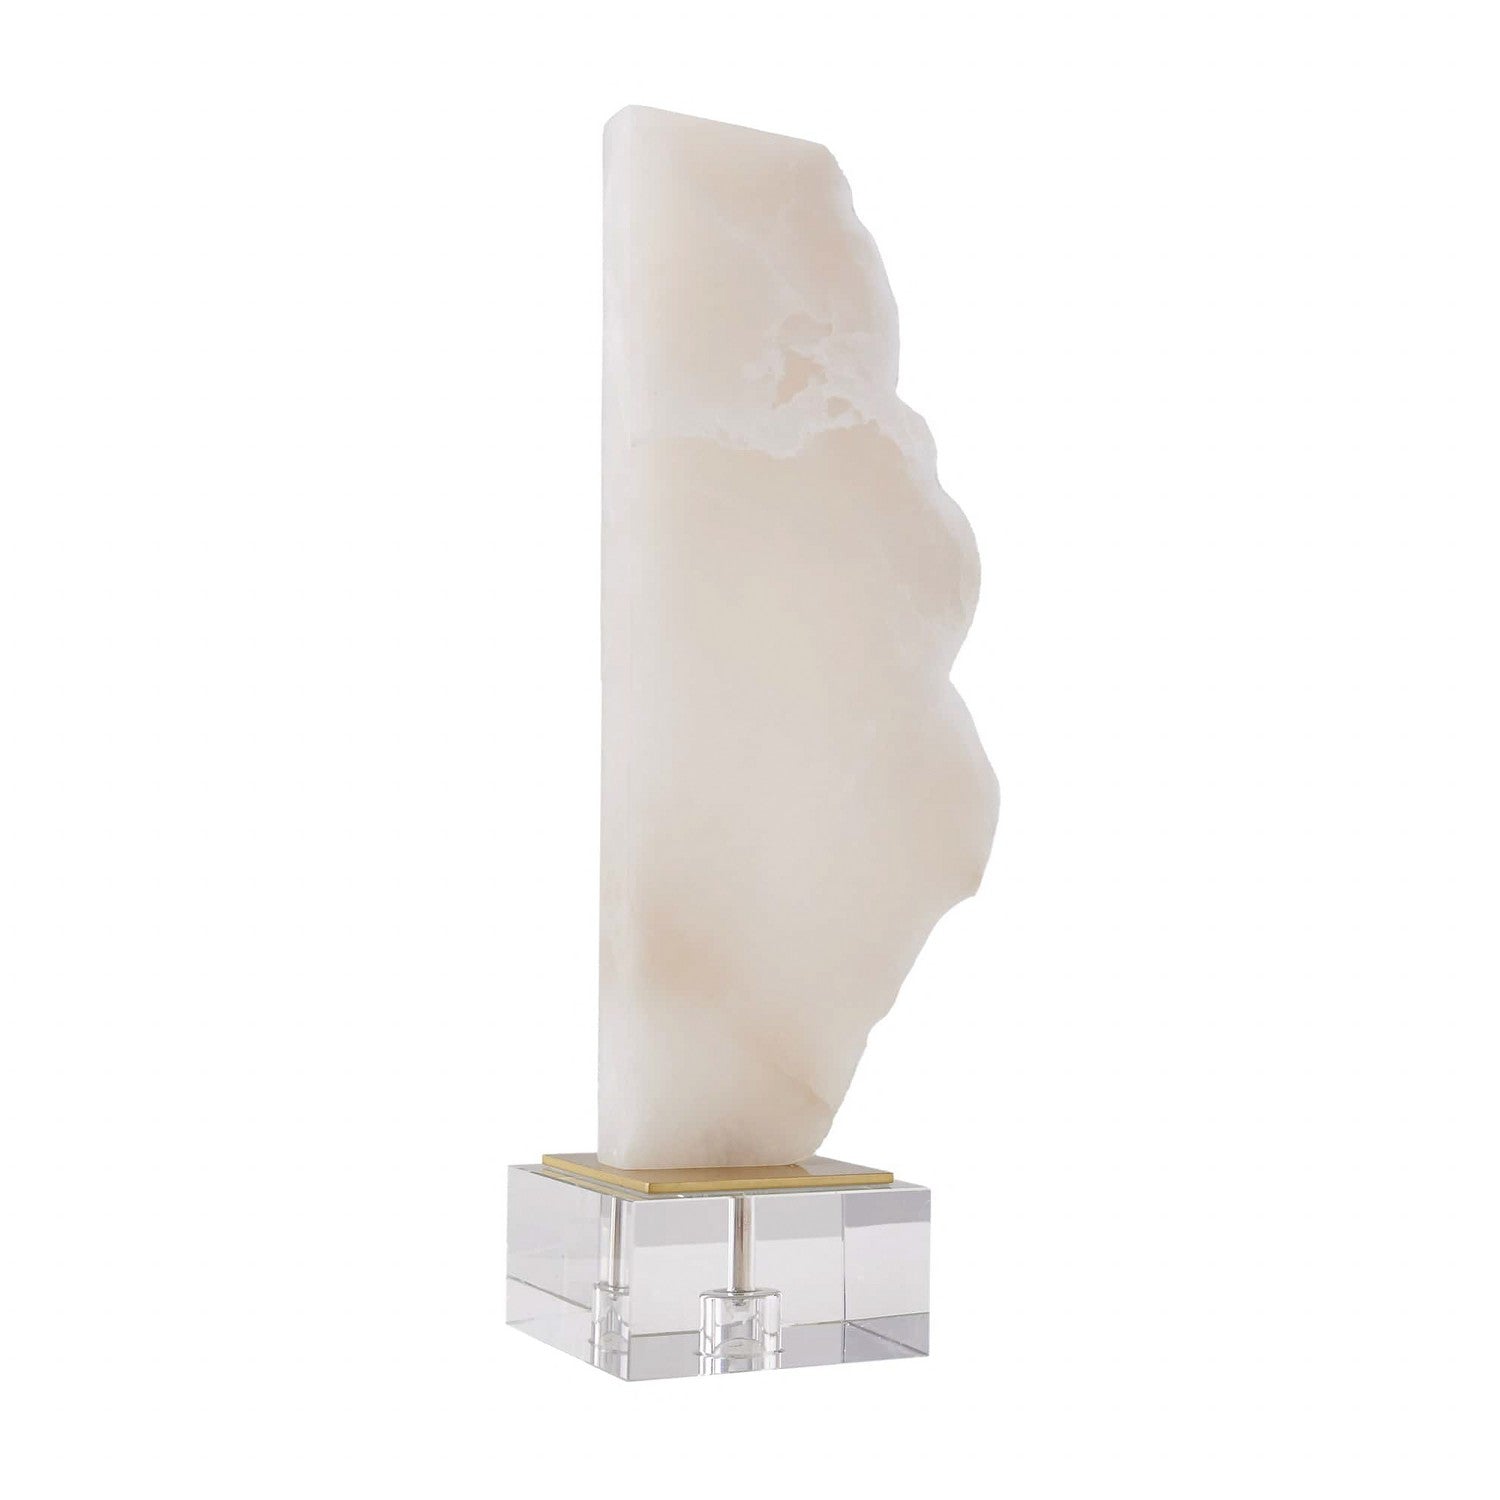 Sculpture from the Taos collection in White finish